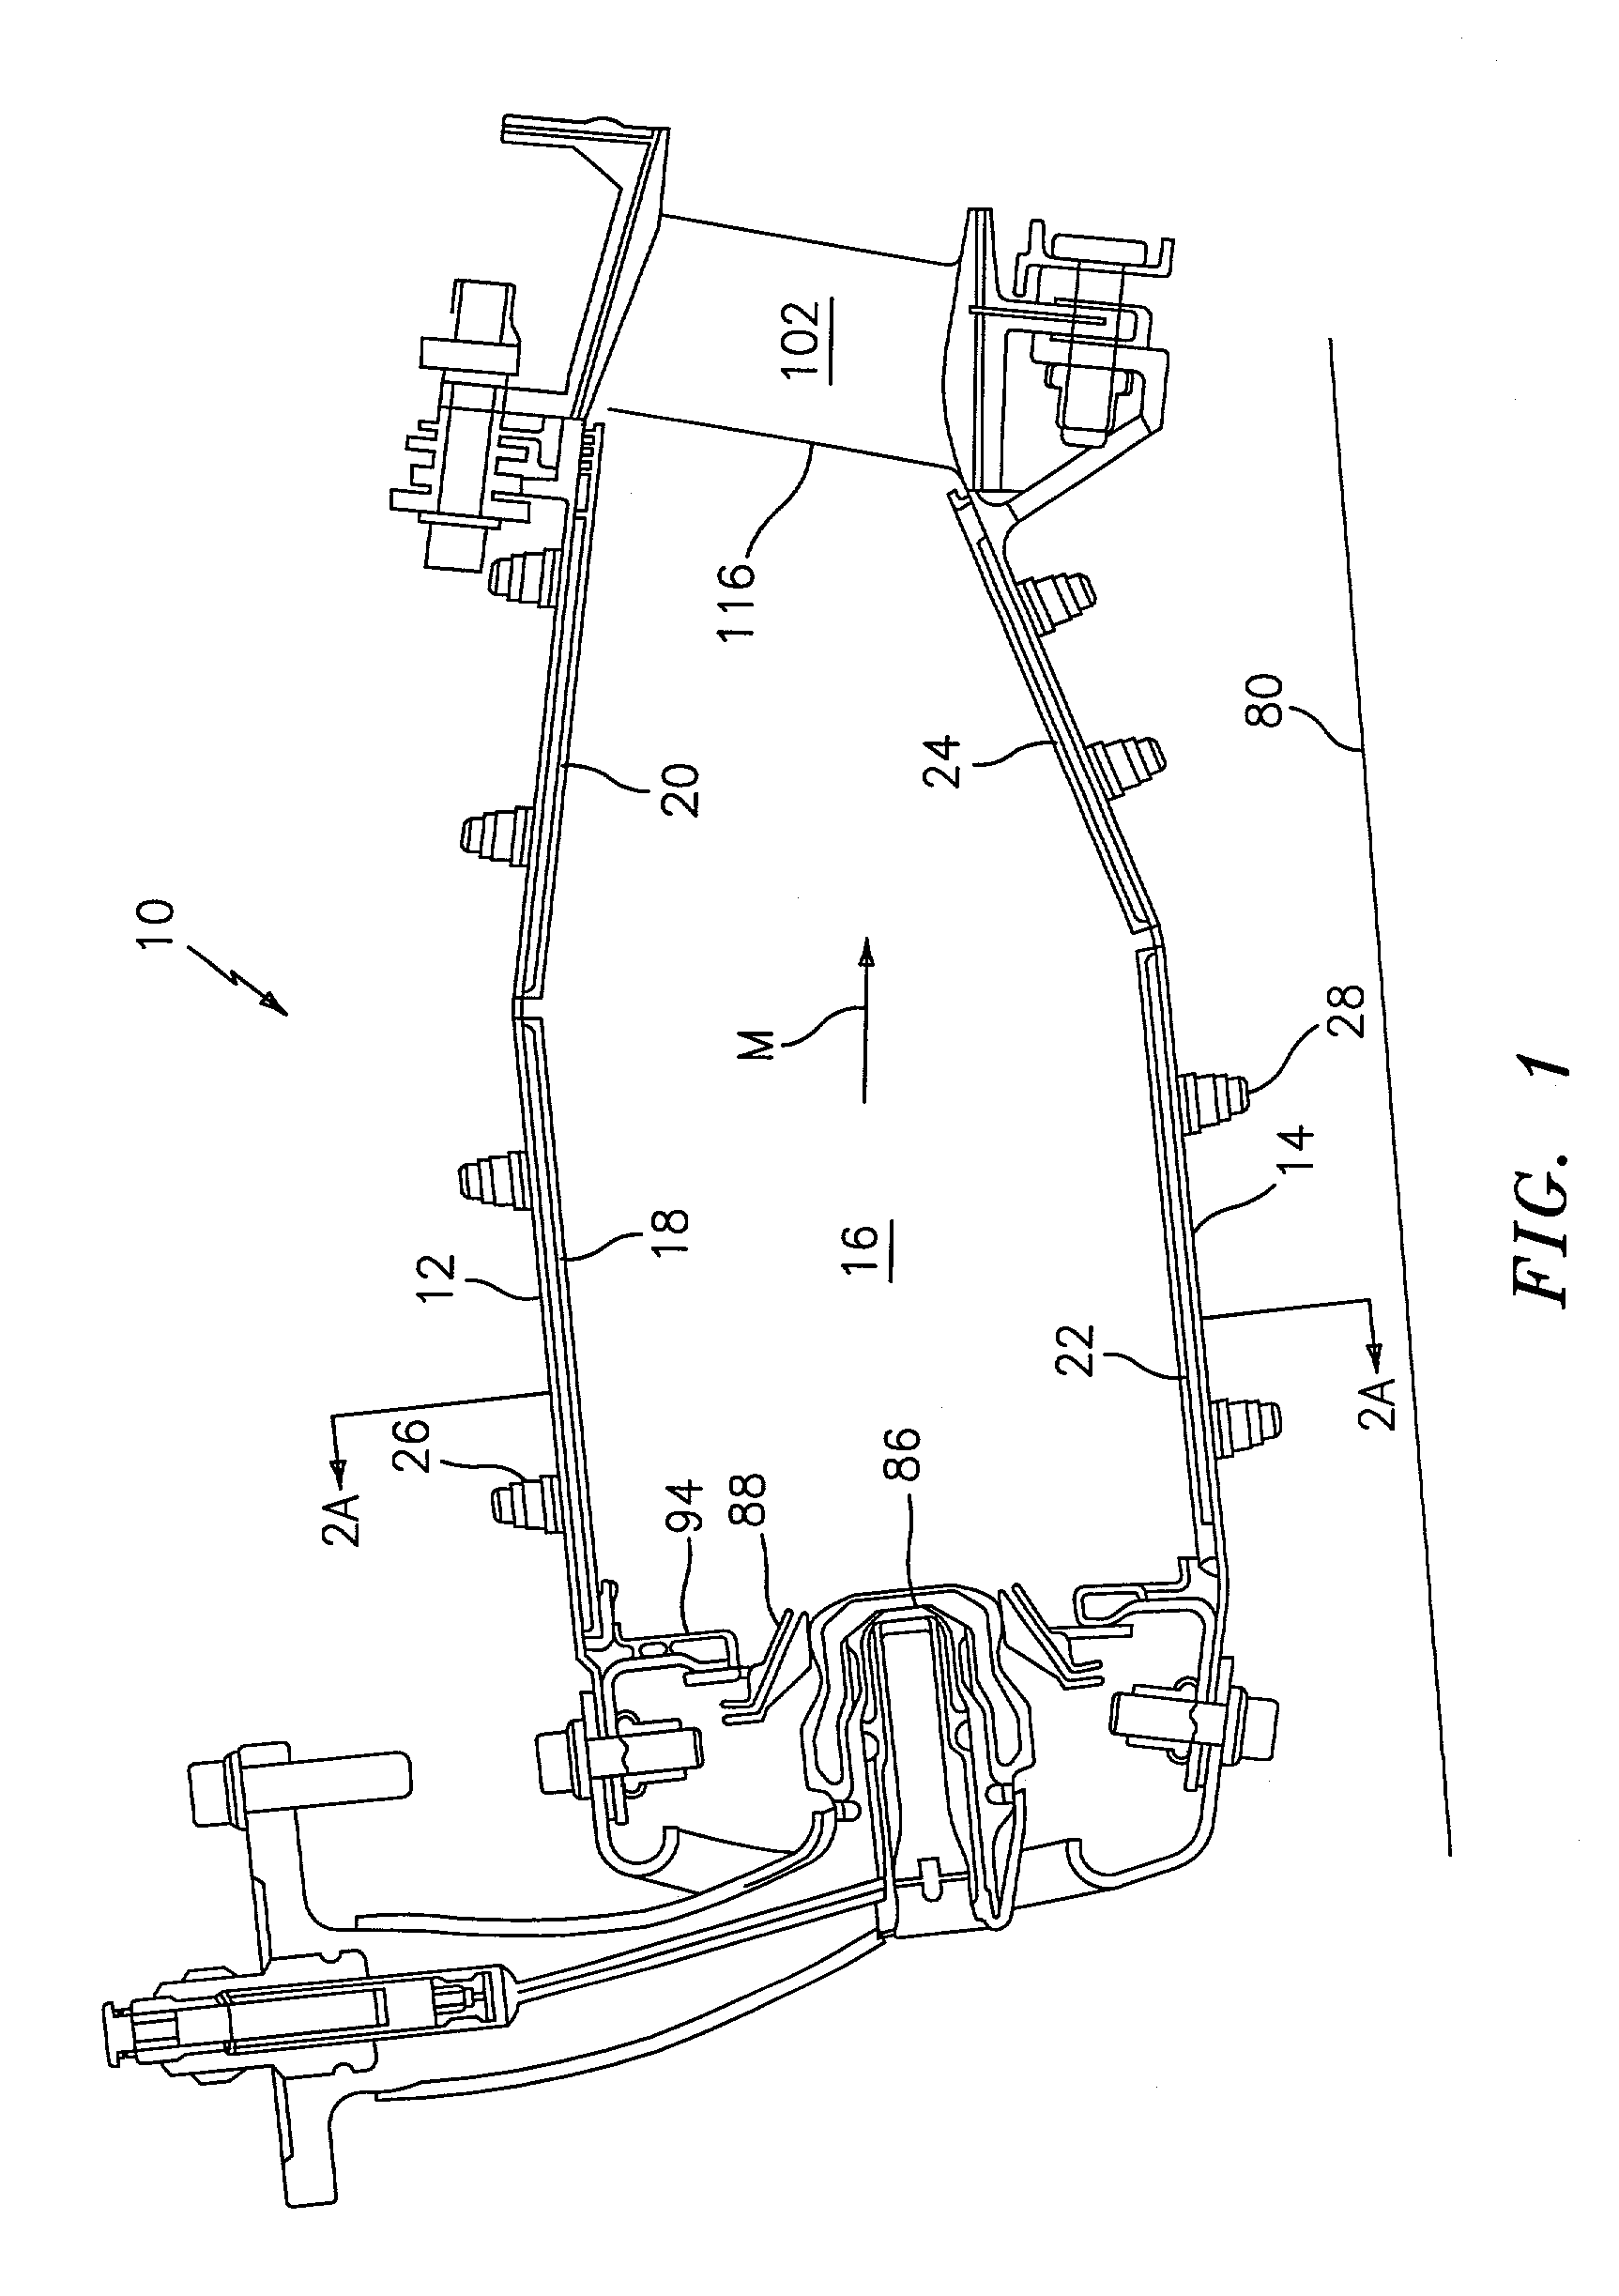 Heat shield panels for use in a combustor for a gas turbine engine